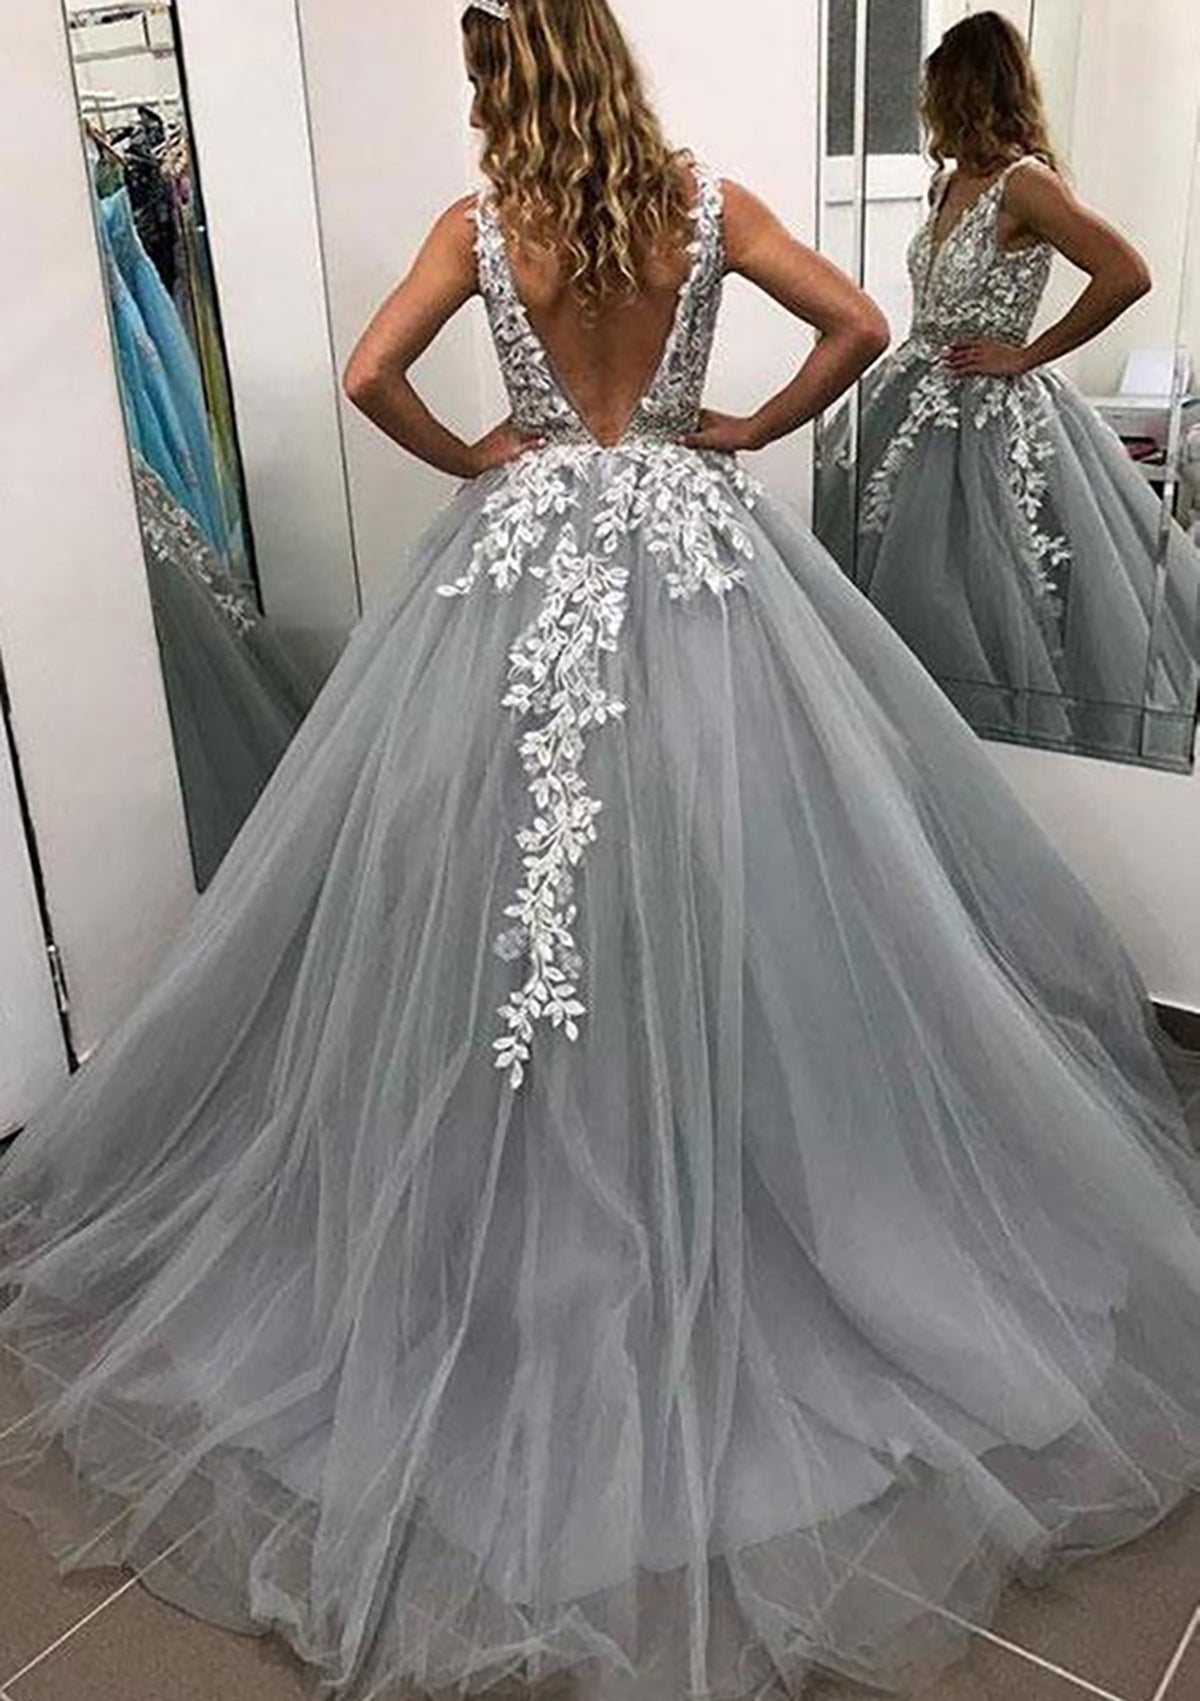 Adley | Ball Gown Sleeveless Long/Floor-Length Tulle Prom Dress With Lace Appliqued Beading